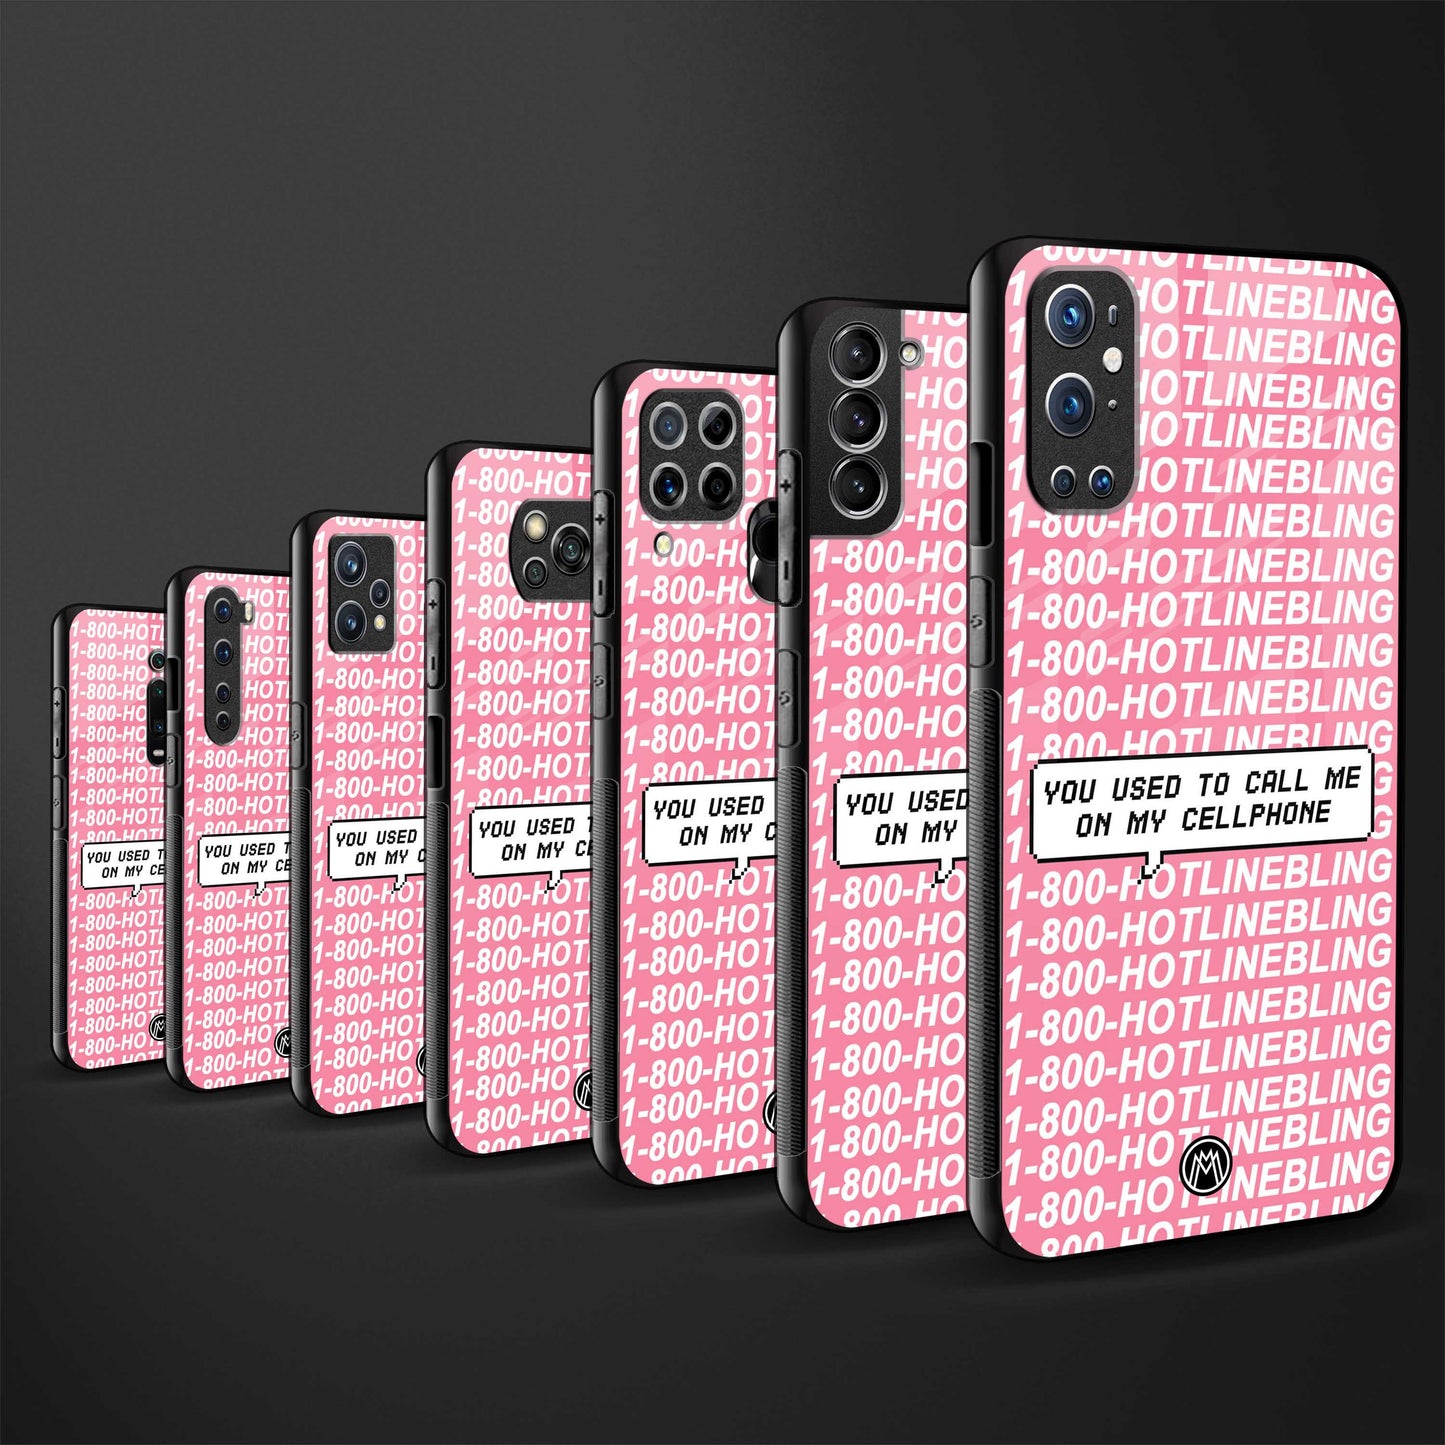 1800 hotline bling phone cover for samsung galaxy a50 